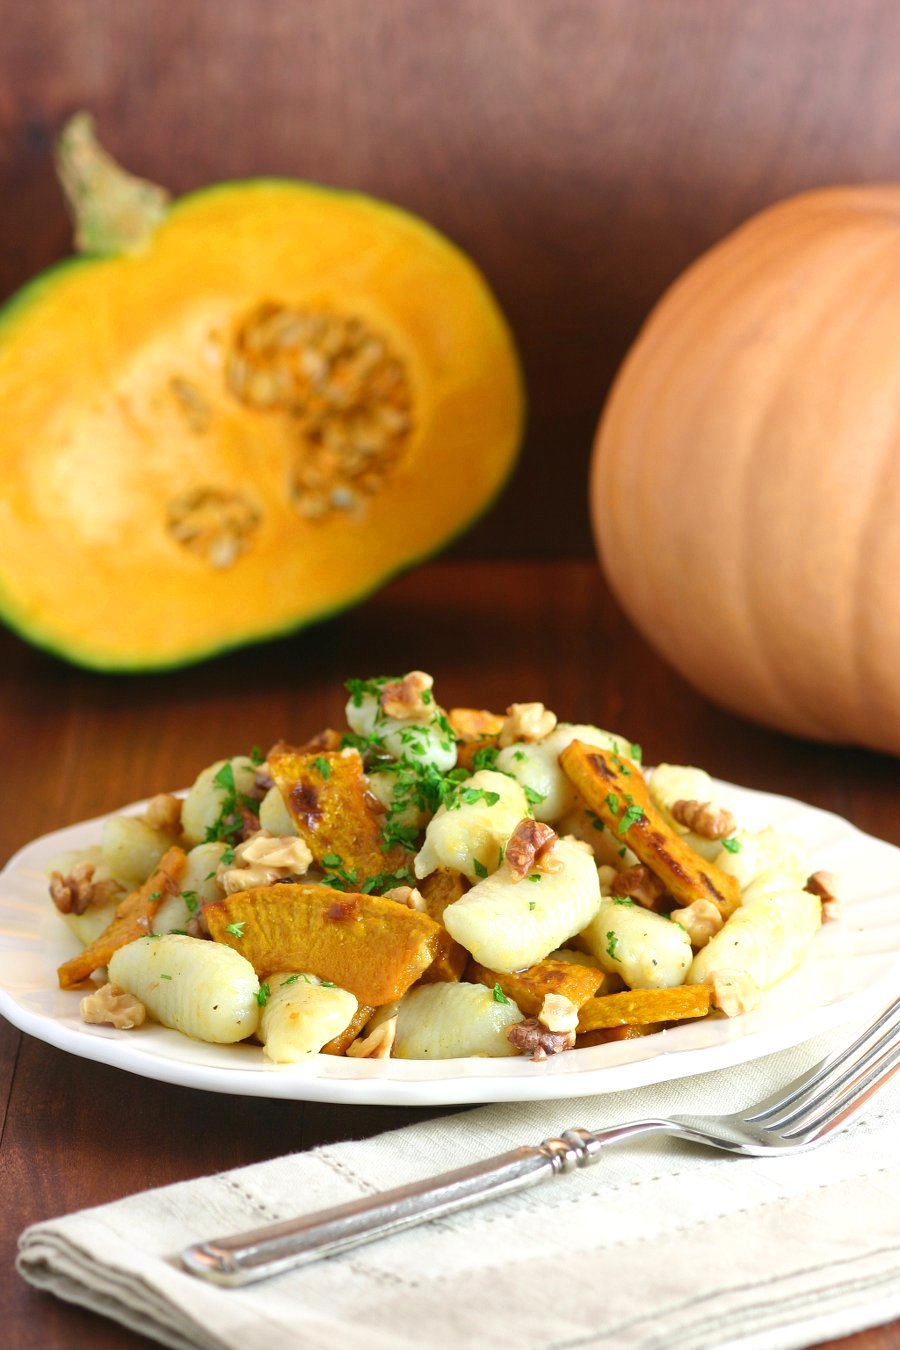 Gnocchi with Roasted Pumpkin and Walnuts is a hearty pasta entrée with Fall flavors and a fluffy texture.